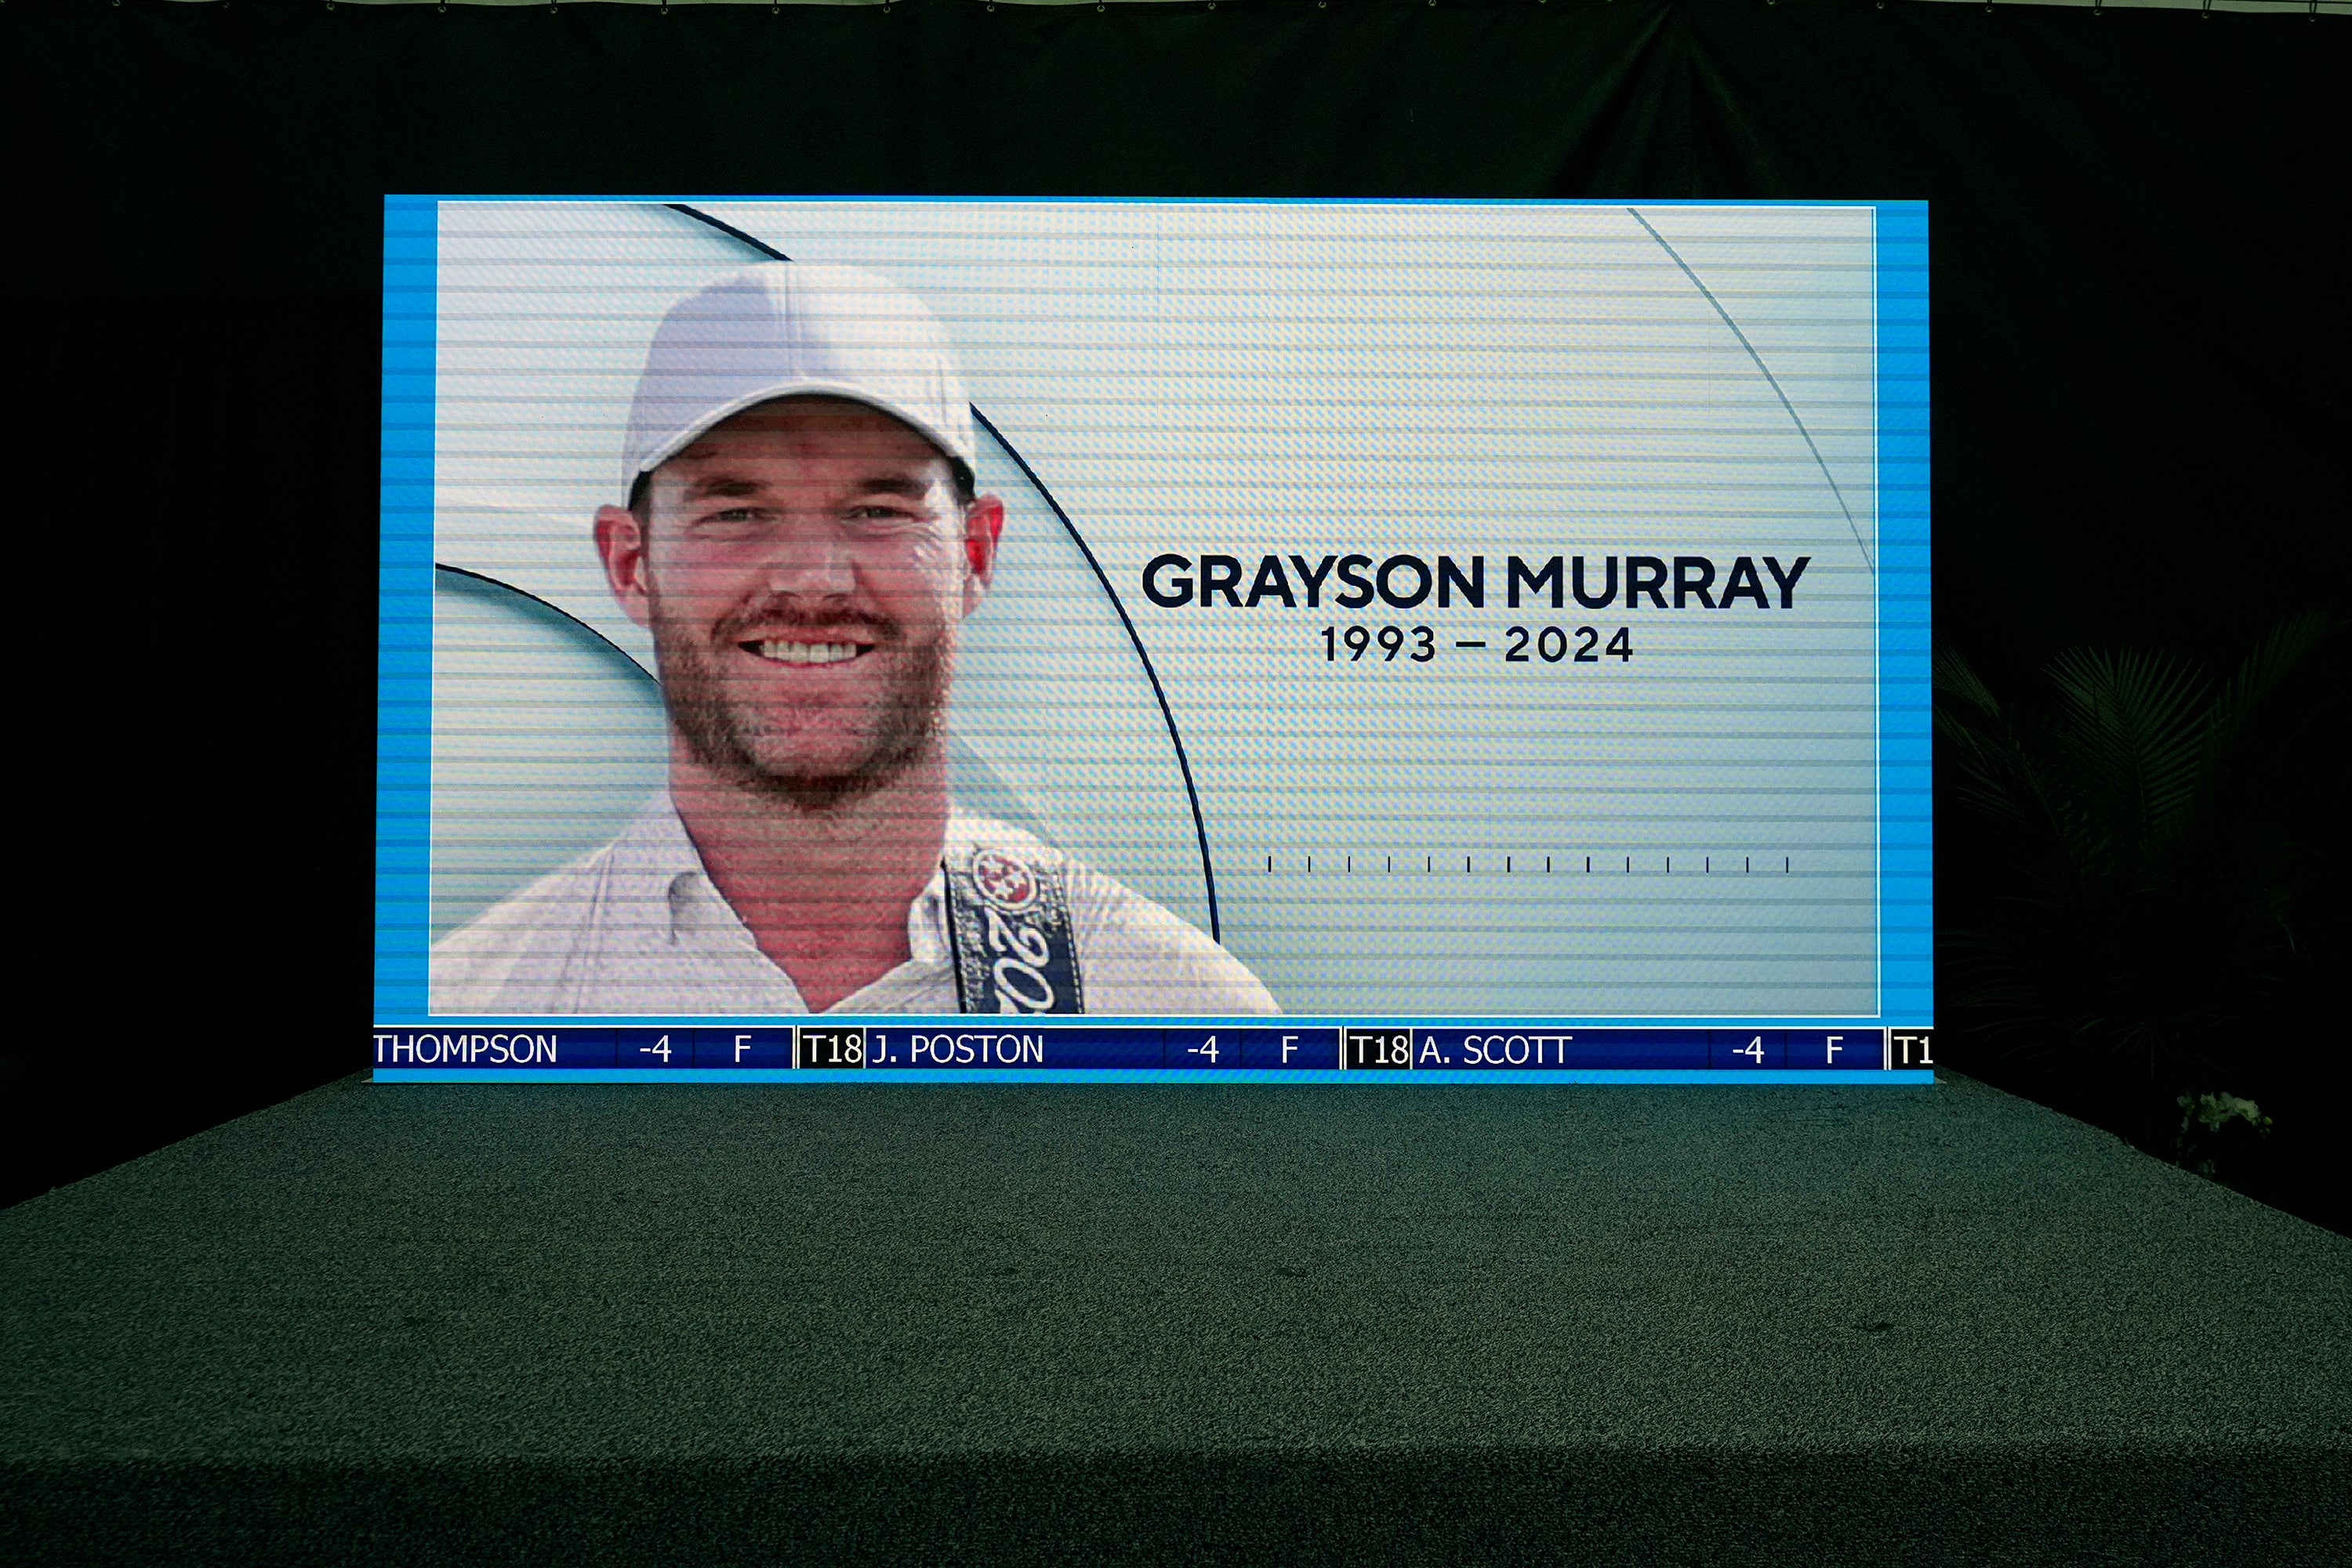 A golf broadcast by CBS is played on an empty stage at the media center showing a photo of Grayson Murray eiqtitiuuinv